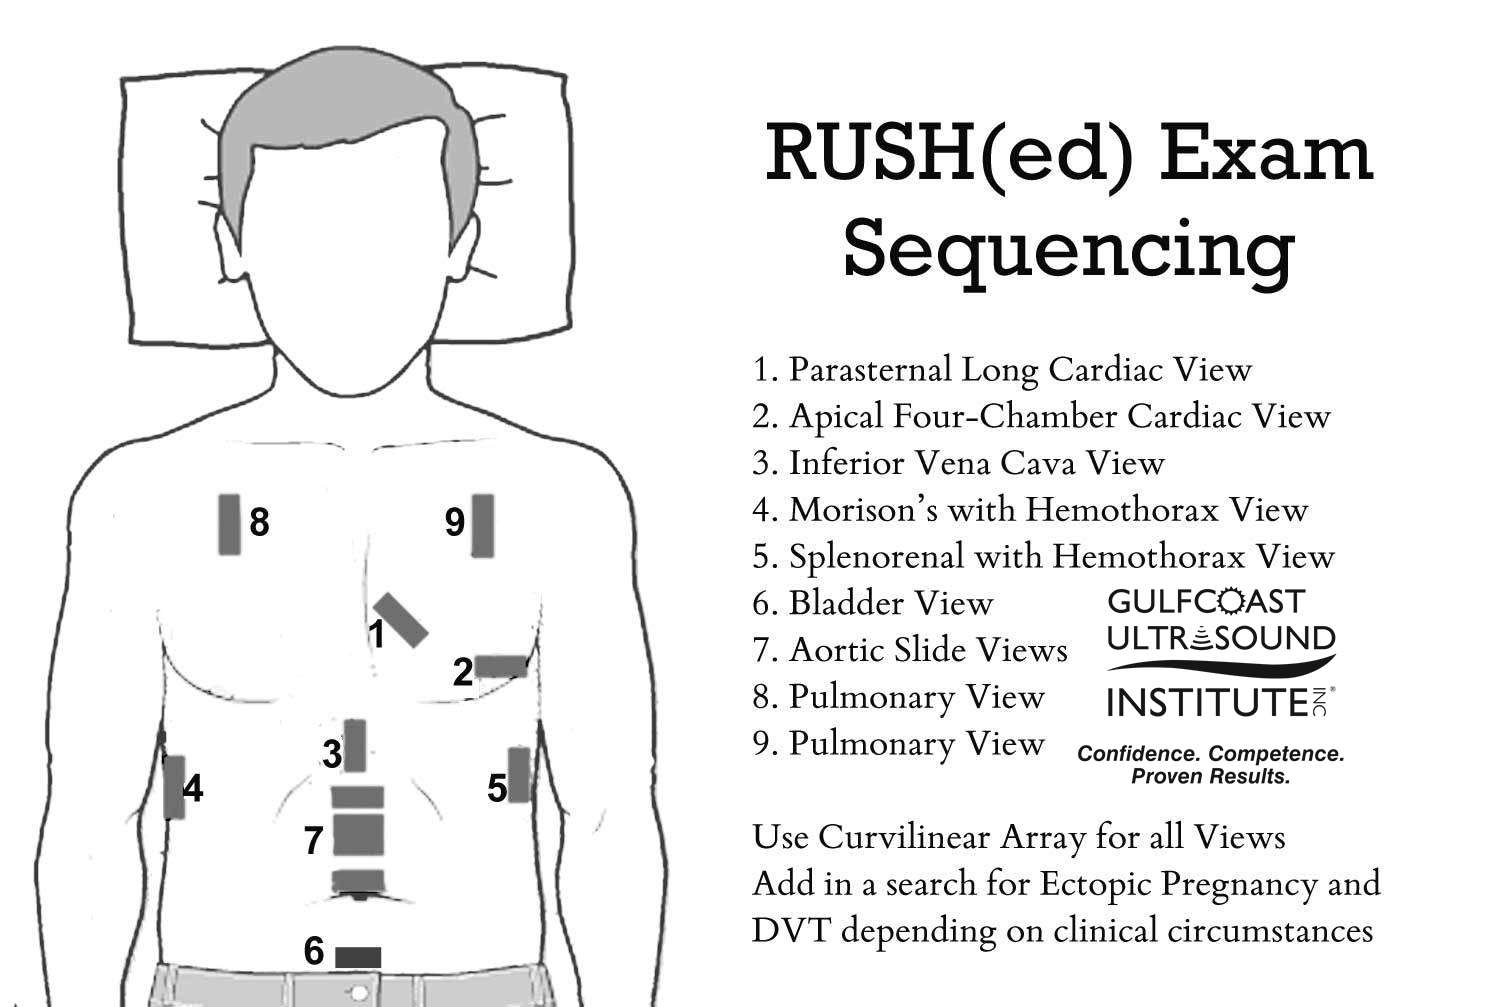 Rapid Ultrasound for Shock & Hypotension (RUSH): A systematic approach to evaluating patients presenting to the ED with undifferentiated hypotension